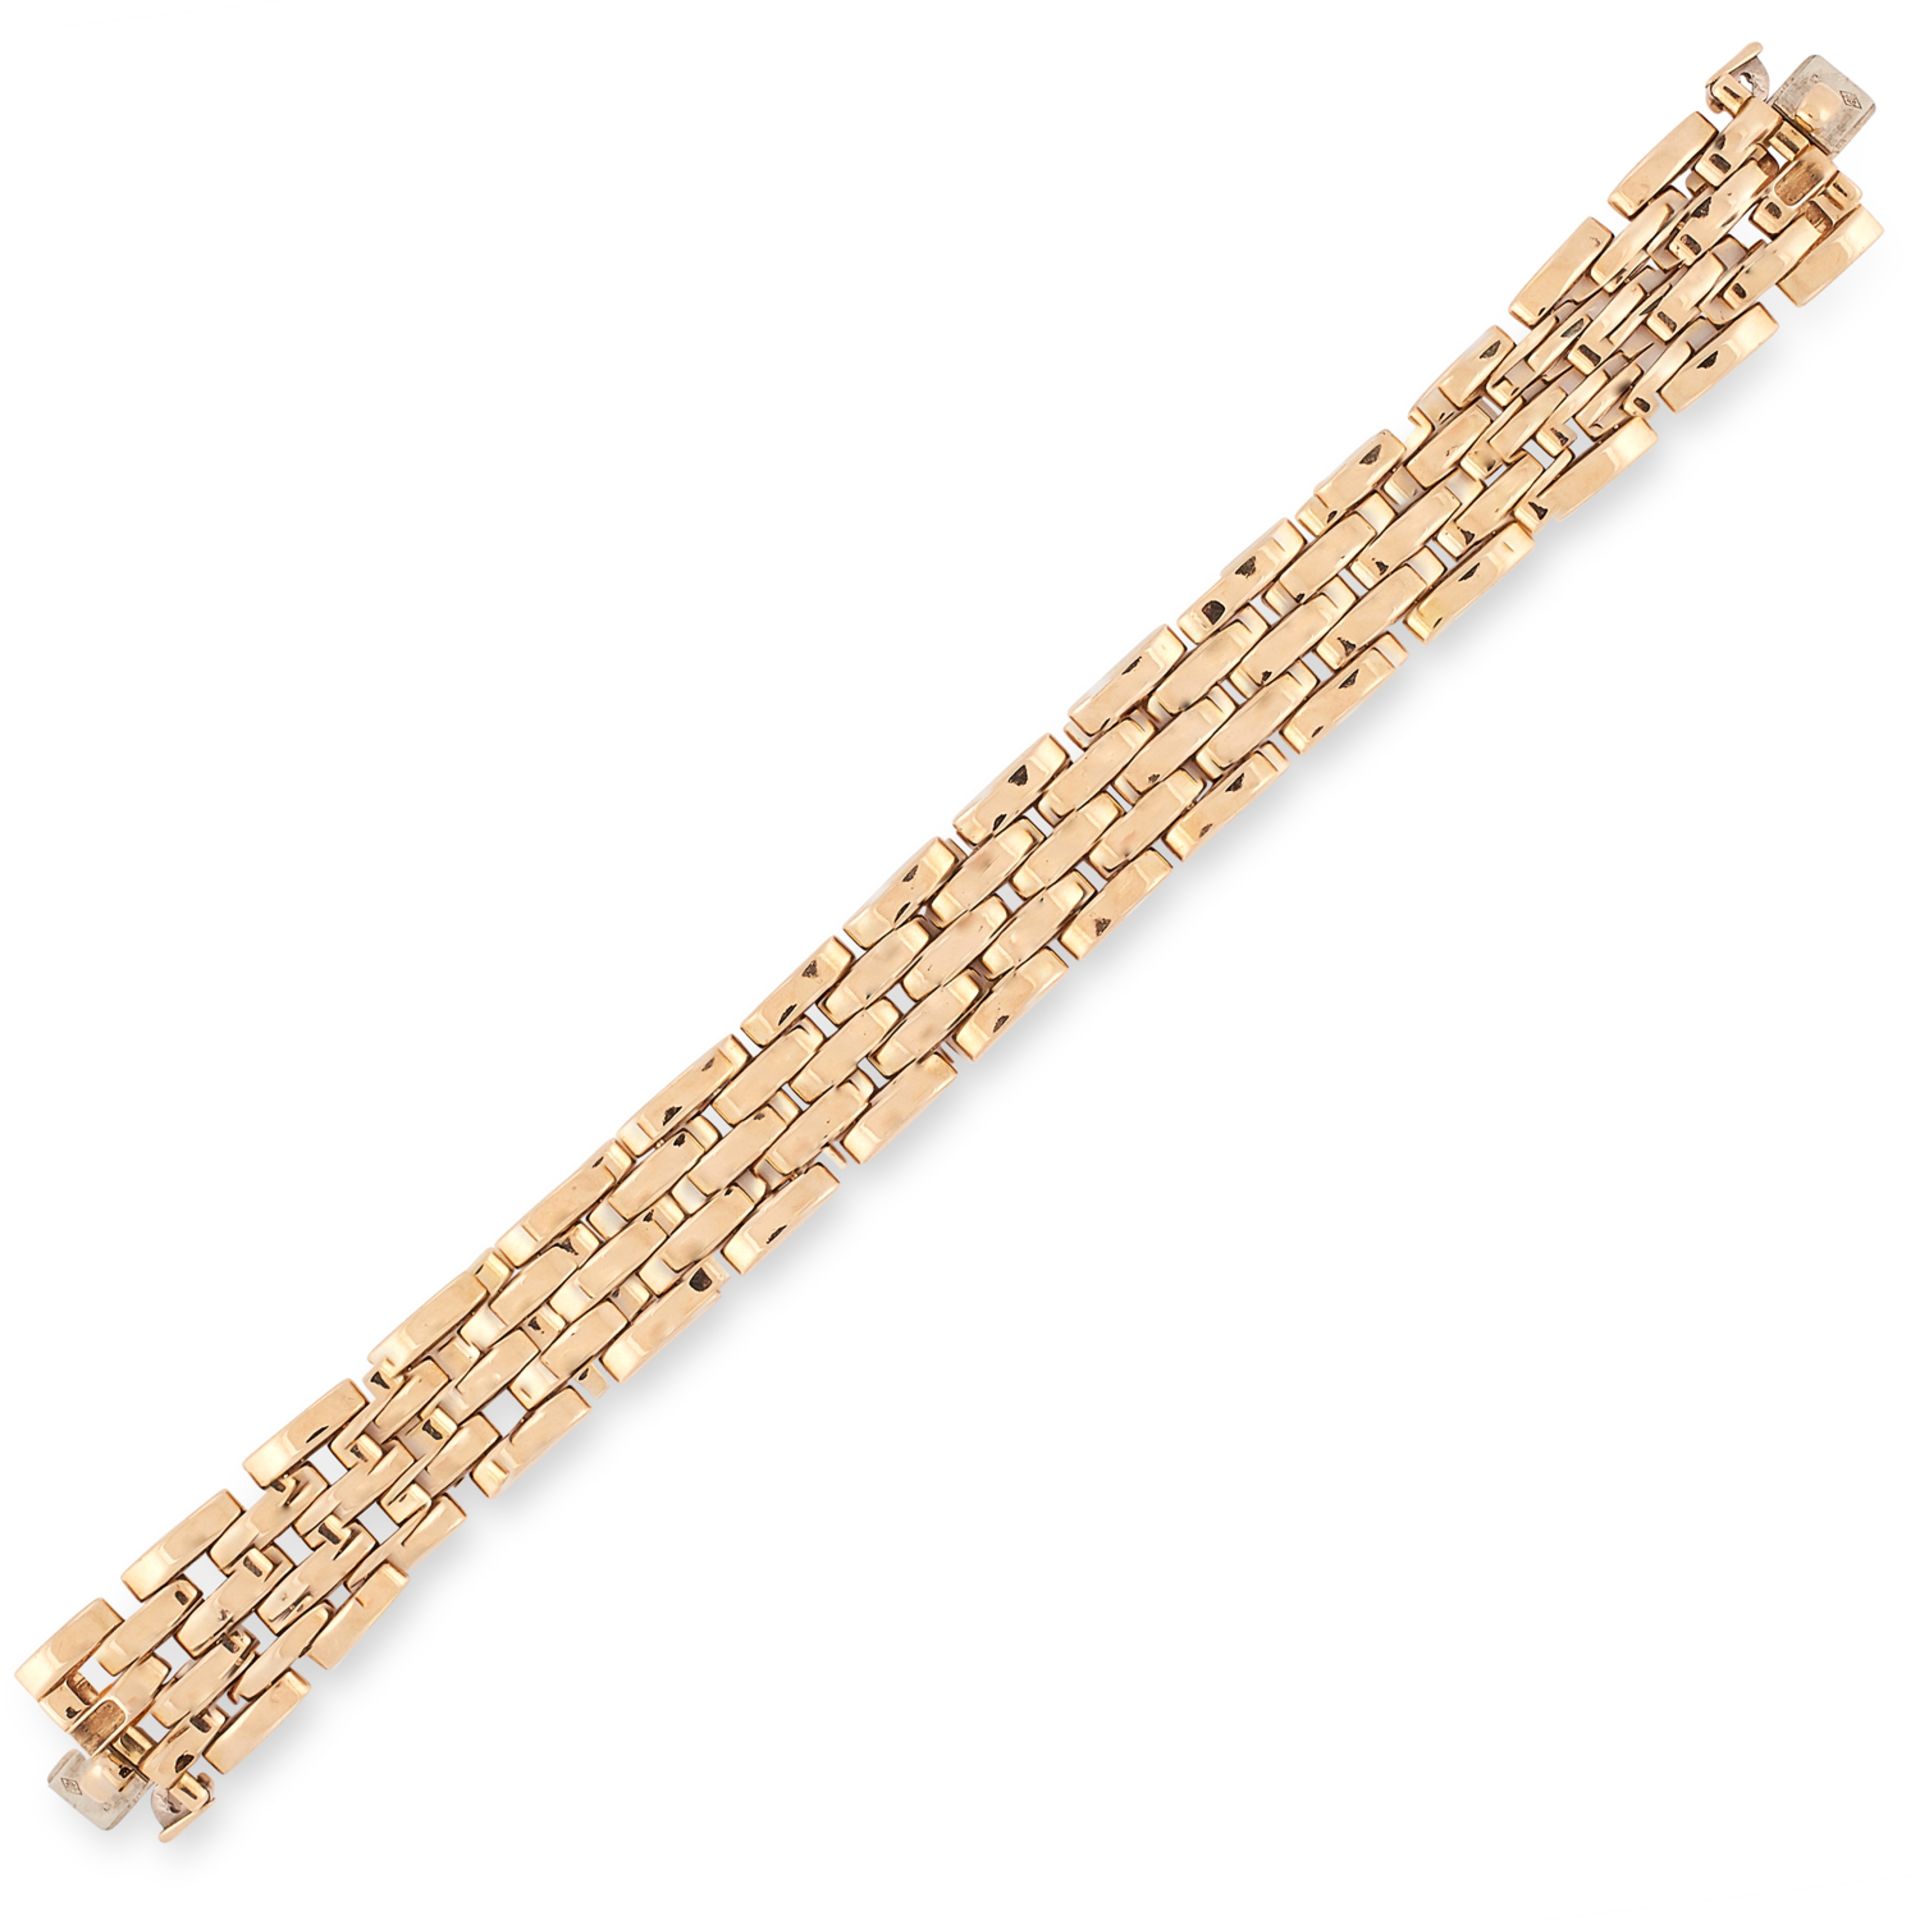 A MAILLON PANTHERE BRACELET, CARTIER designed as a five rows of chain links, signed Cartier and